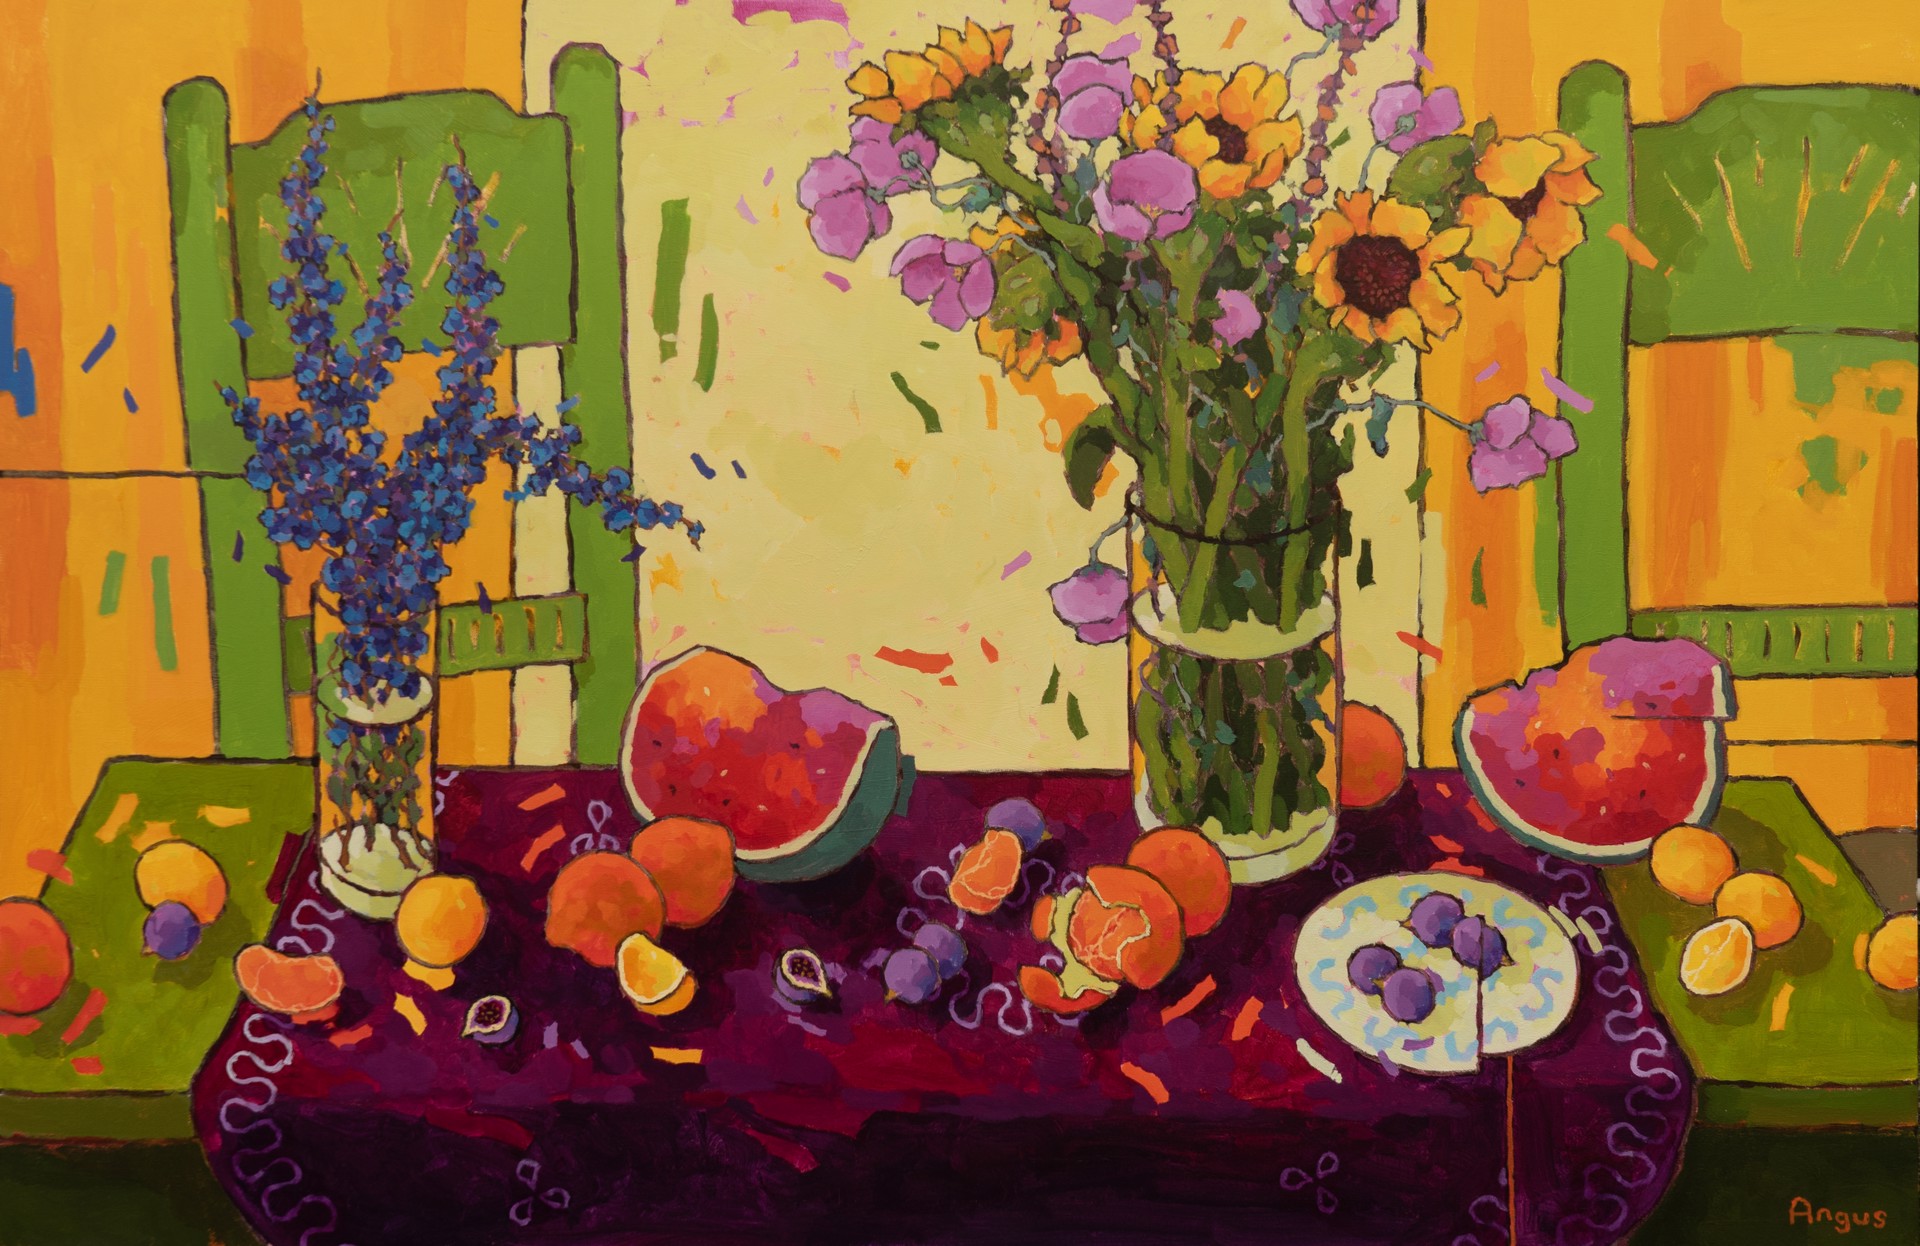 Sunflowers & Figs over Rich Purple by Angus